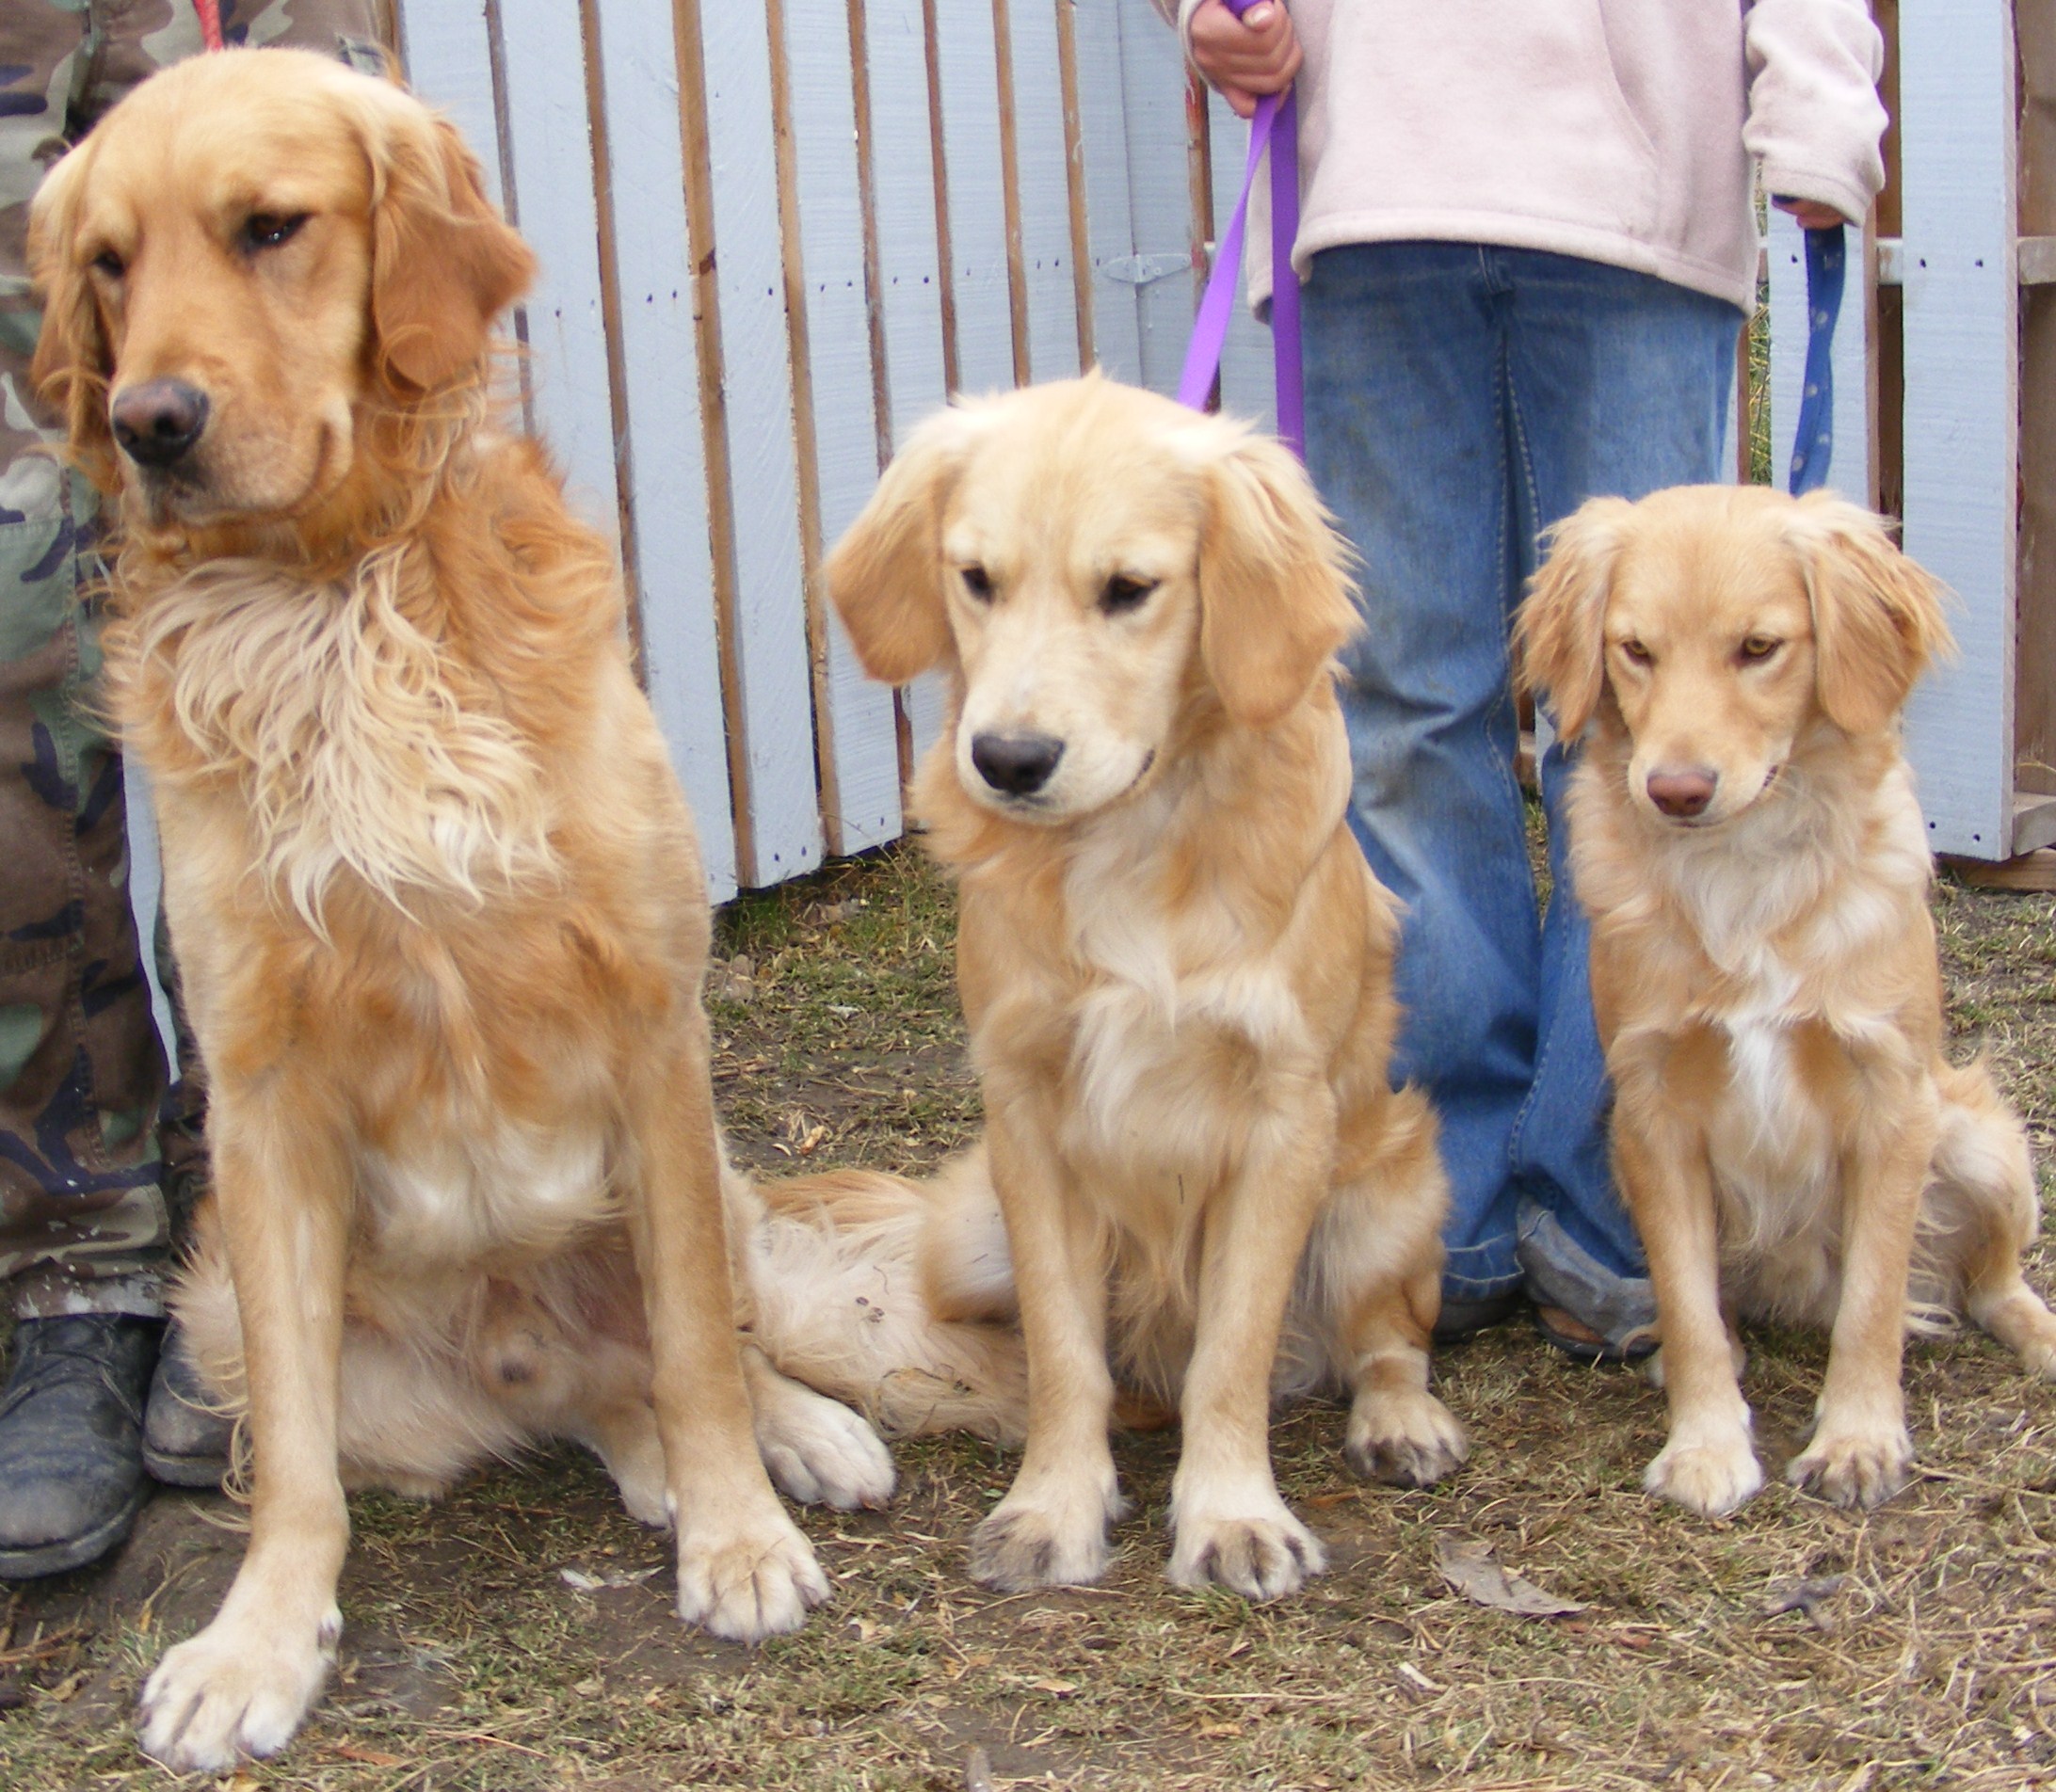 evigt Udtale pære 10 Things You Need to Know About the Miniature Golden Retriever